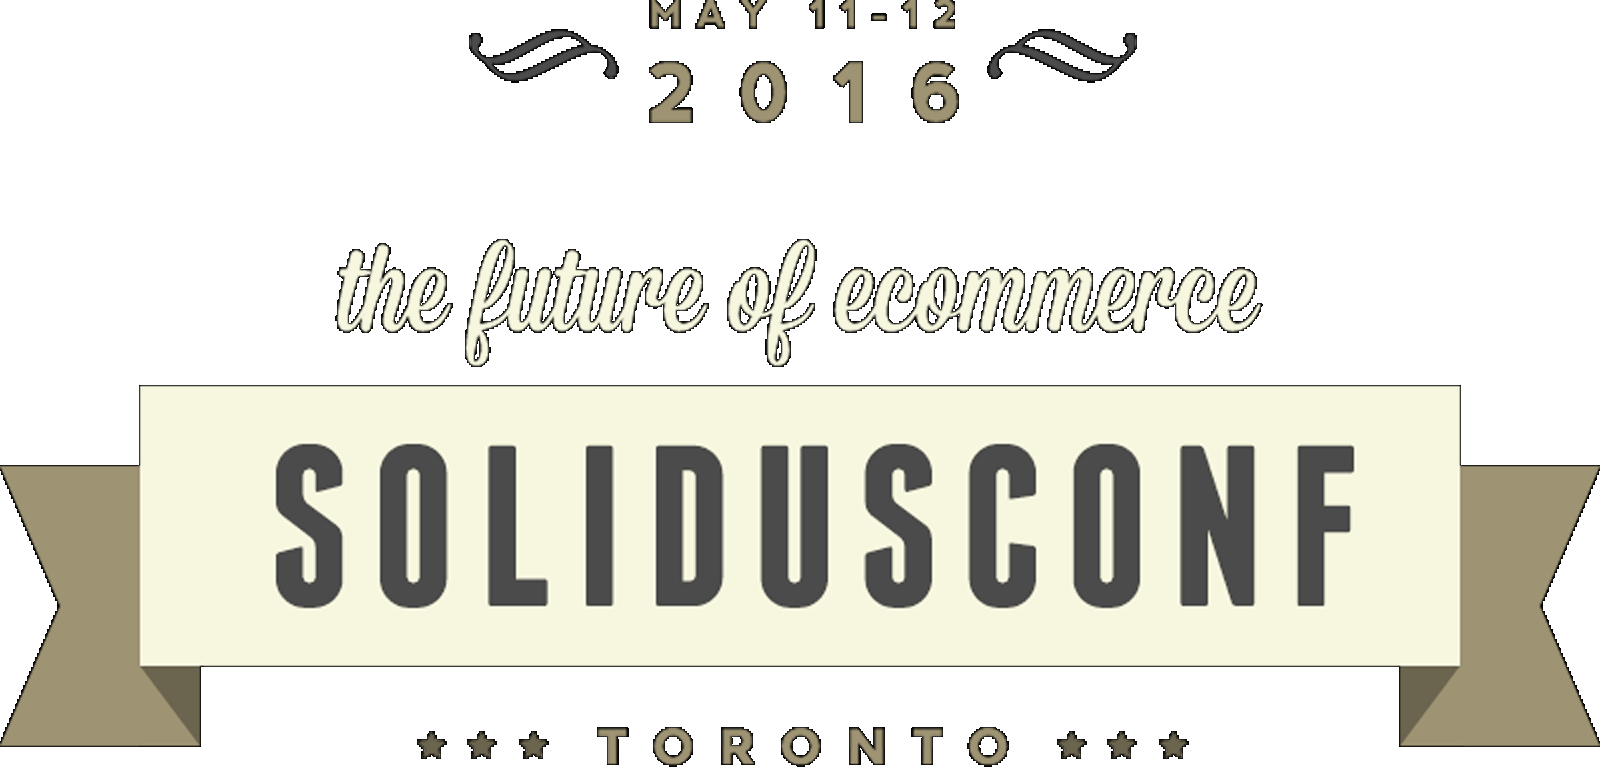 Solidus conference 2016, May 11-12,  Toronto